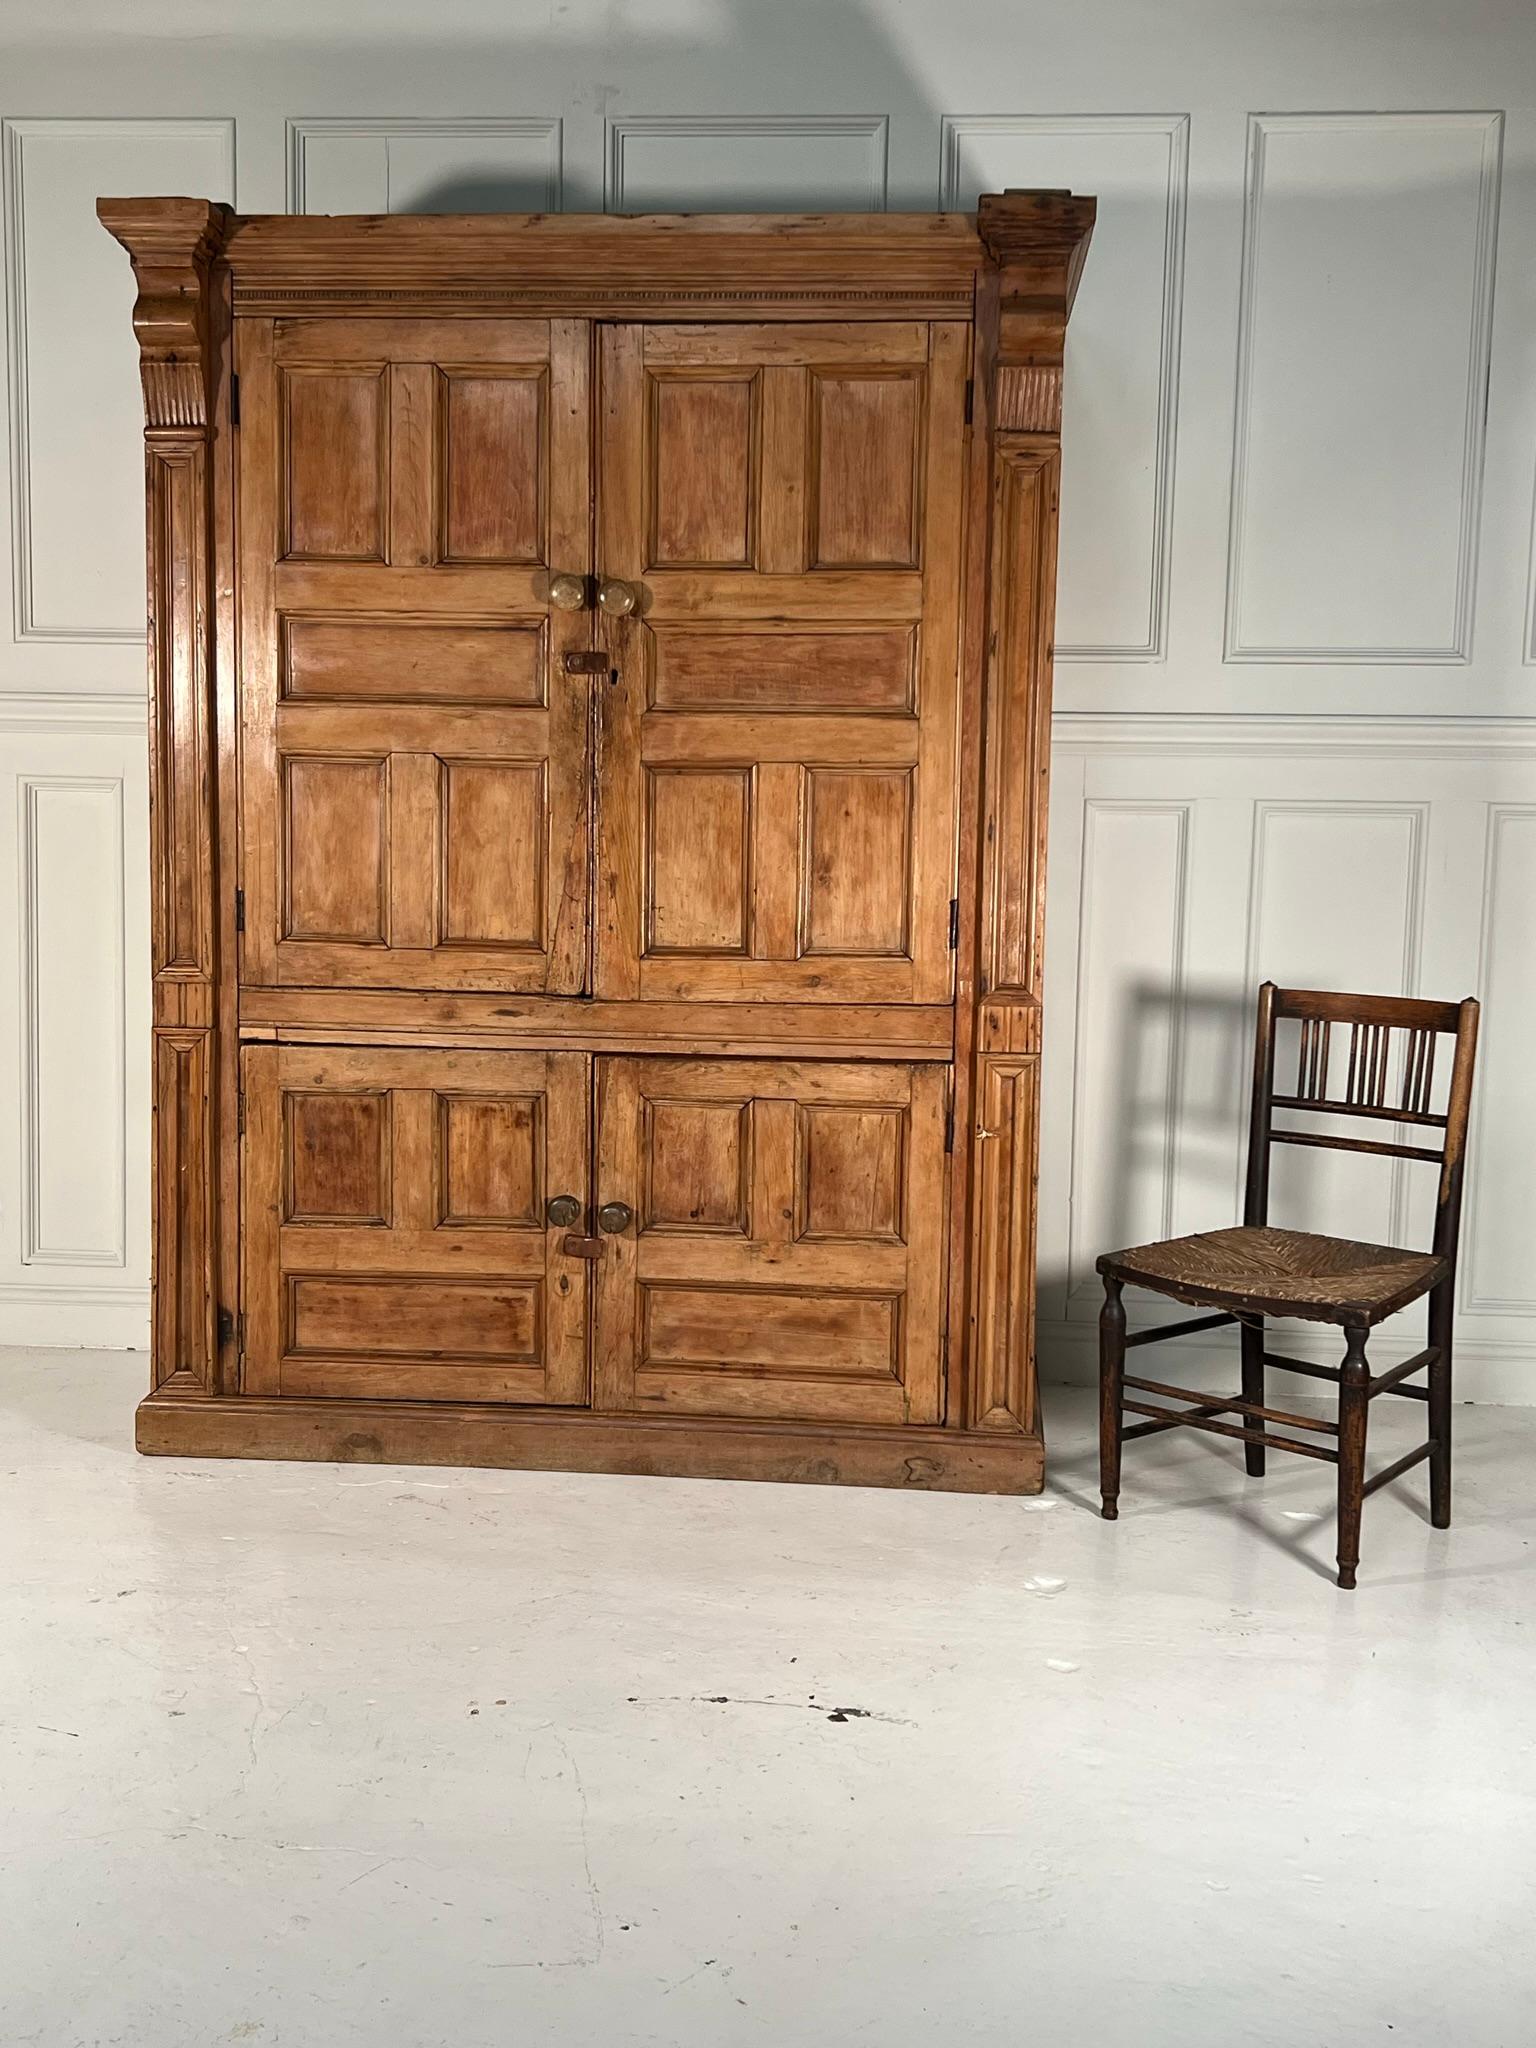 ‘Vernacular perfection for your kitchen or boot room’

A rare example of a mid 19th century, pine, Irish food press/cupboard.

Wonderful patination to the timber showing knocks and bumps and old repairs.

The hinged doors close using original clasps